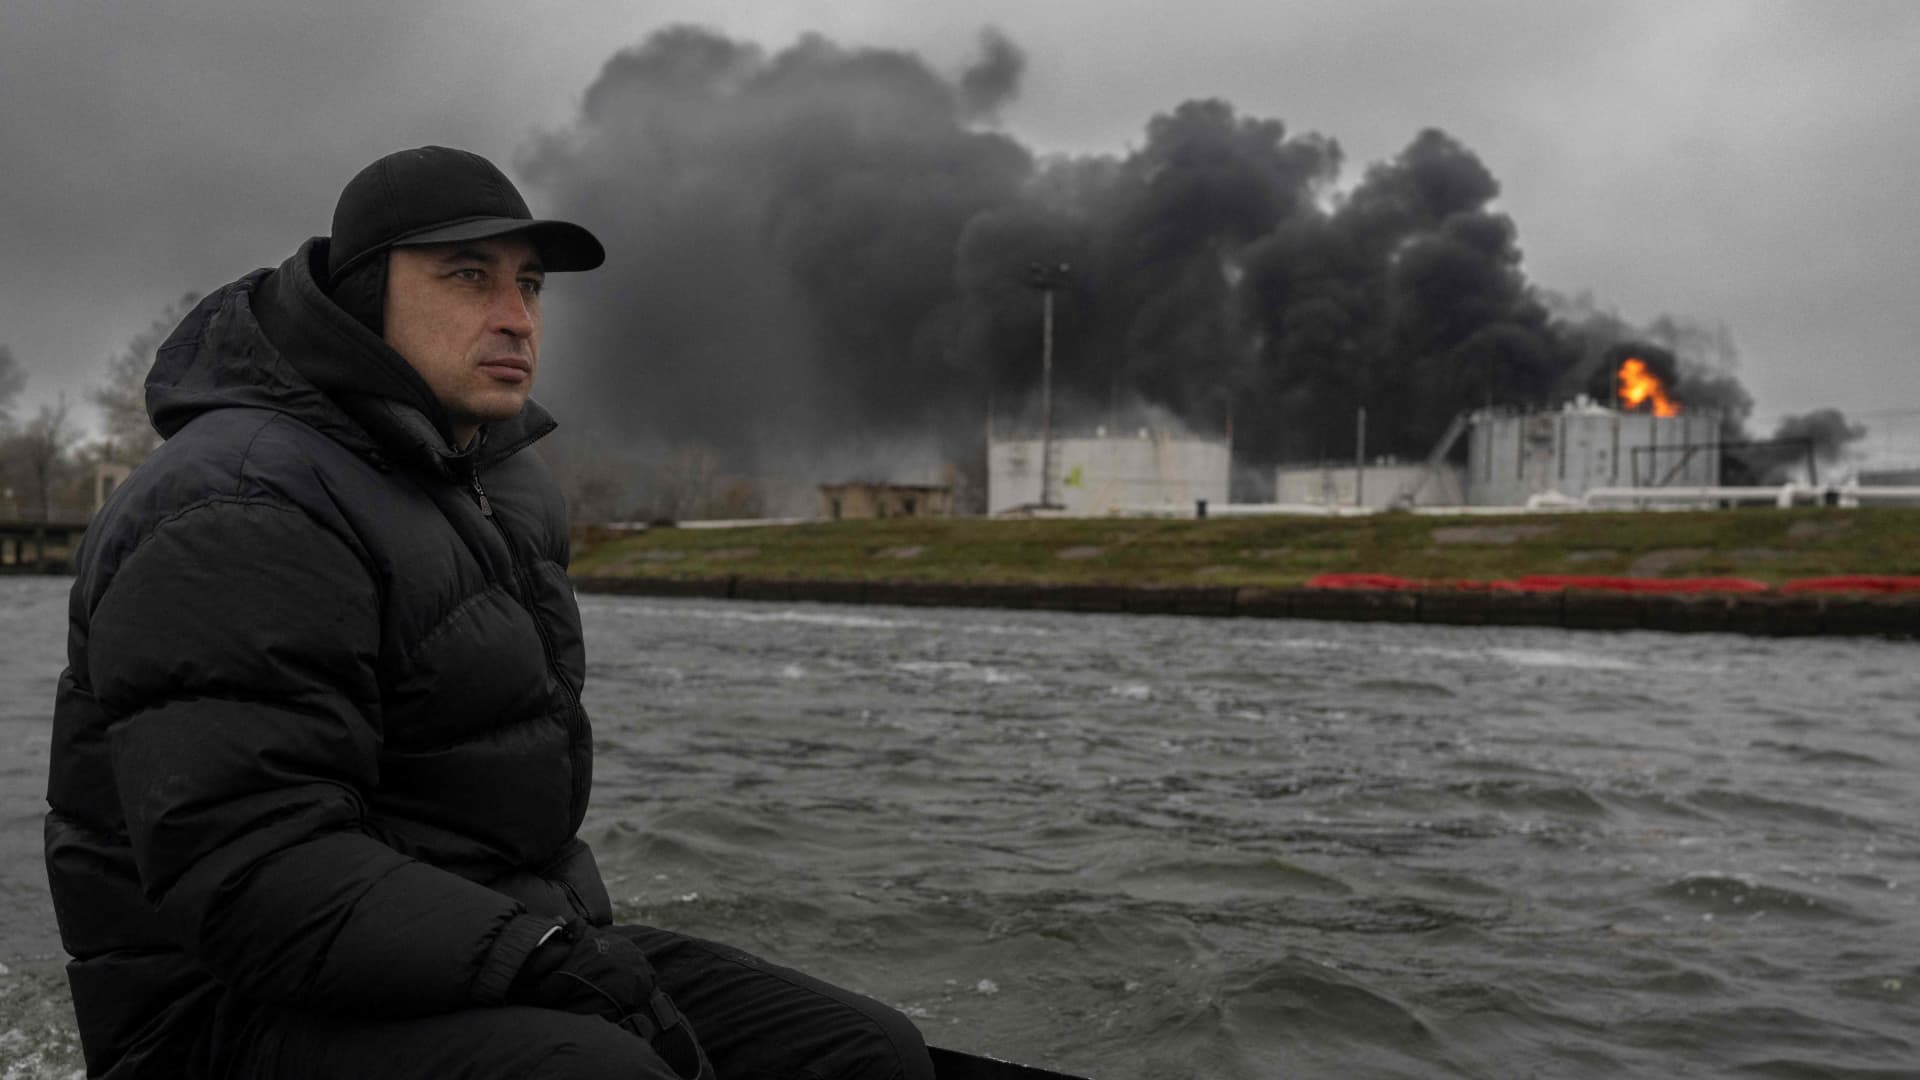 A fisherman sails his boat on the Dnipro River as black smoke rises after an attack on an oil reserve in Kherson, on November 20, 2022, amid the Russian invasion of Ukraine.